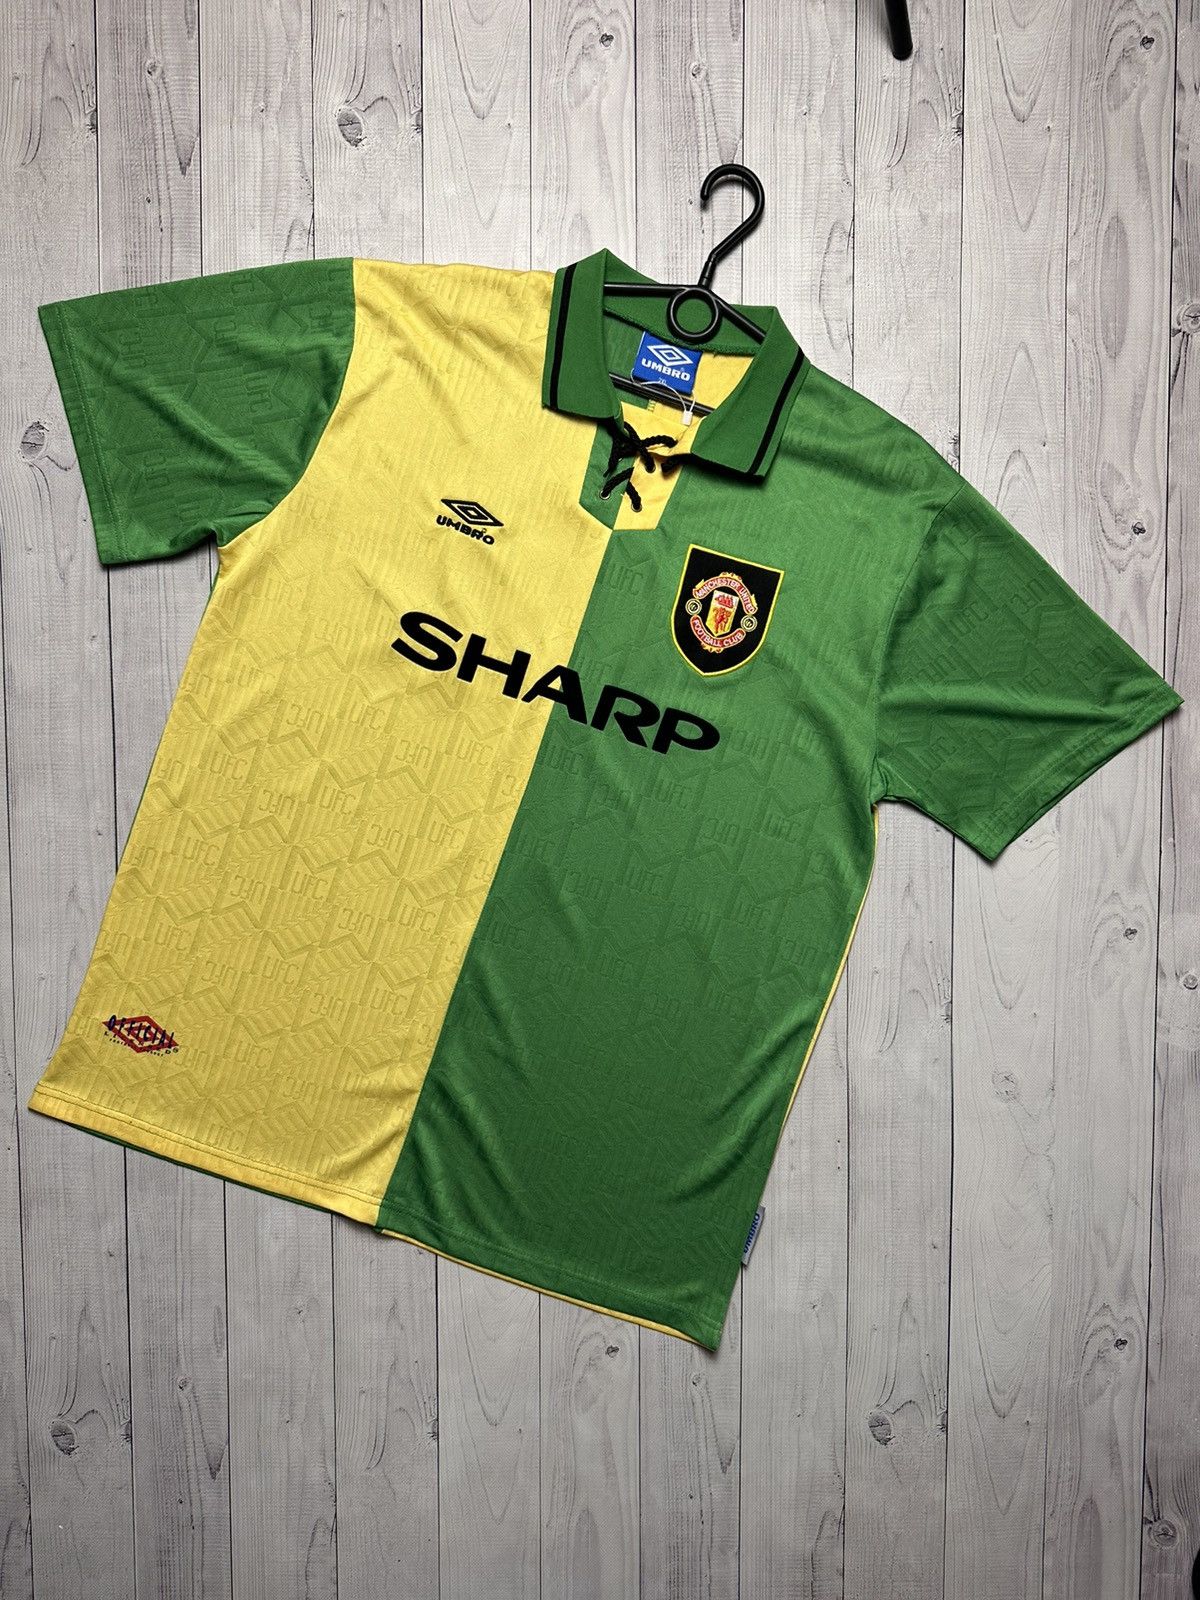 Vintage 1992-94 Manchester United Umbro Football Jersey size XL green  yellow